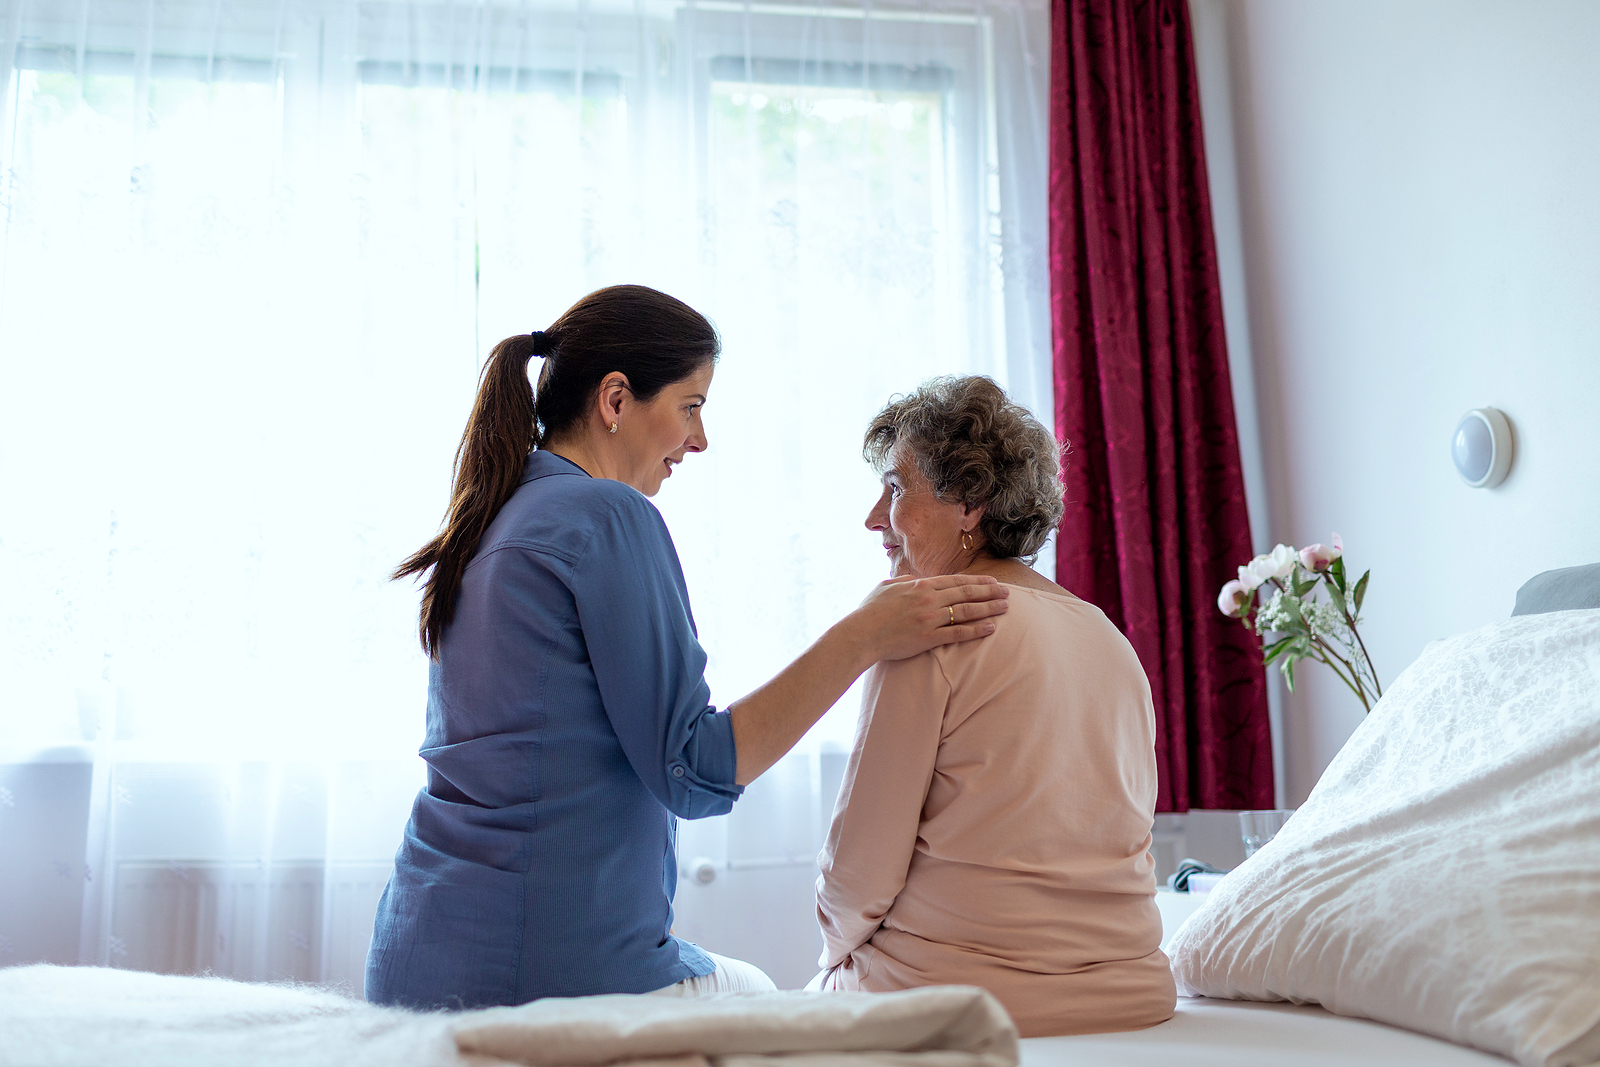 Companion Care at Home in Henderson NV